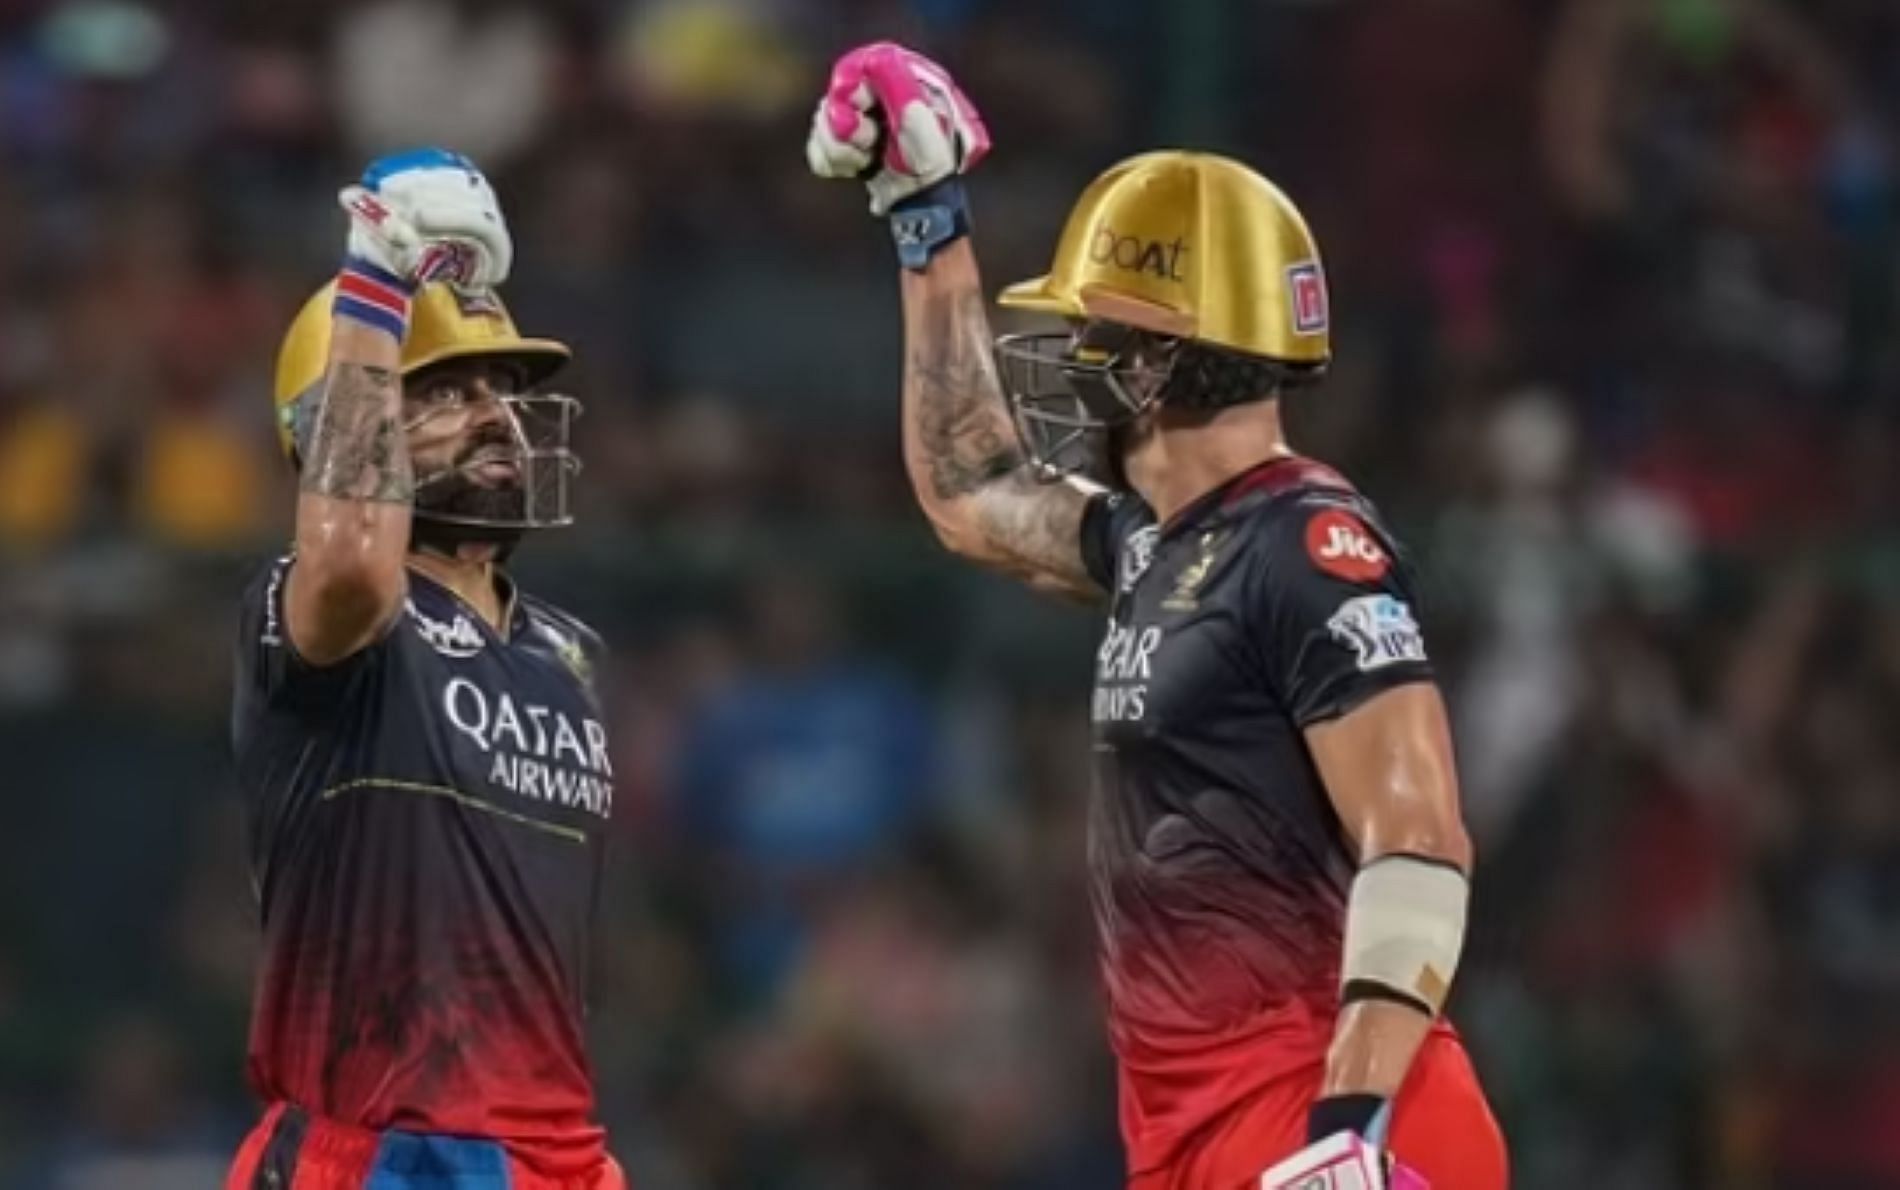 Kohli and Faf did most of the heavy lifting with the bat for RCB last season.